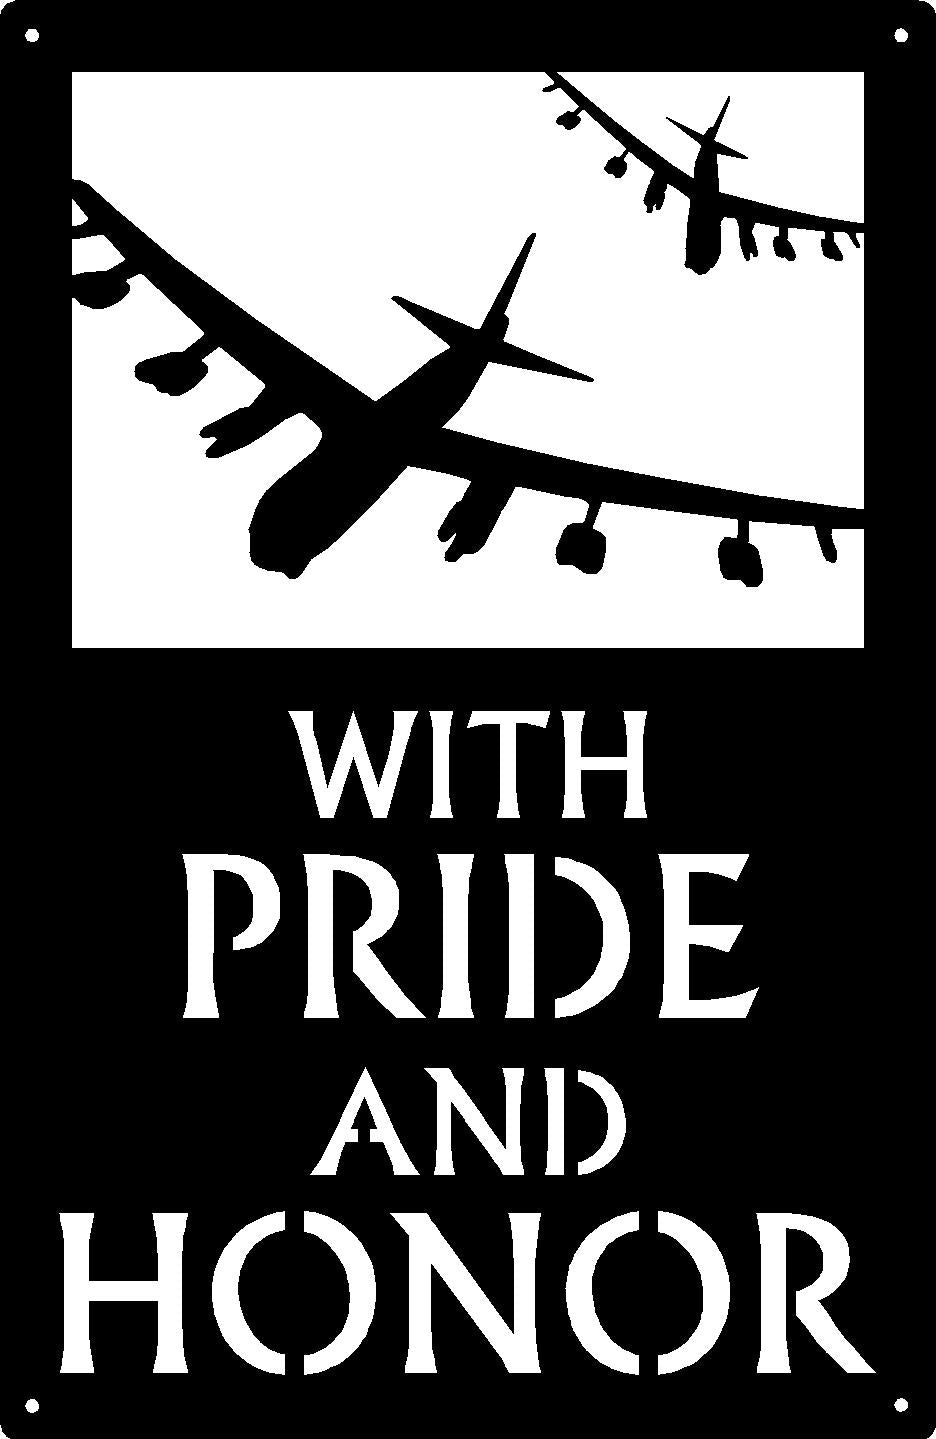 Pride and Honor Air Force B52 - Military Sign - The Metal Peddler  air force, b52, military